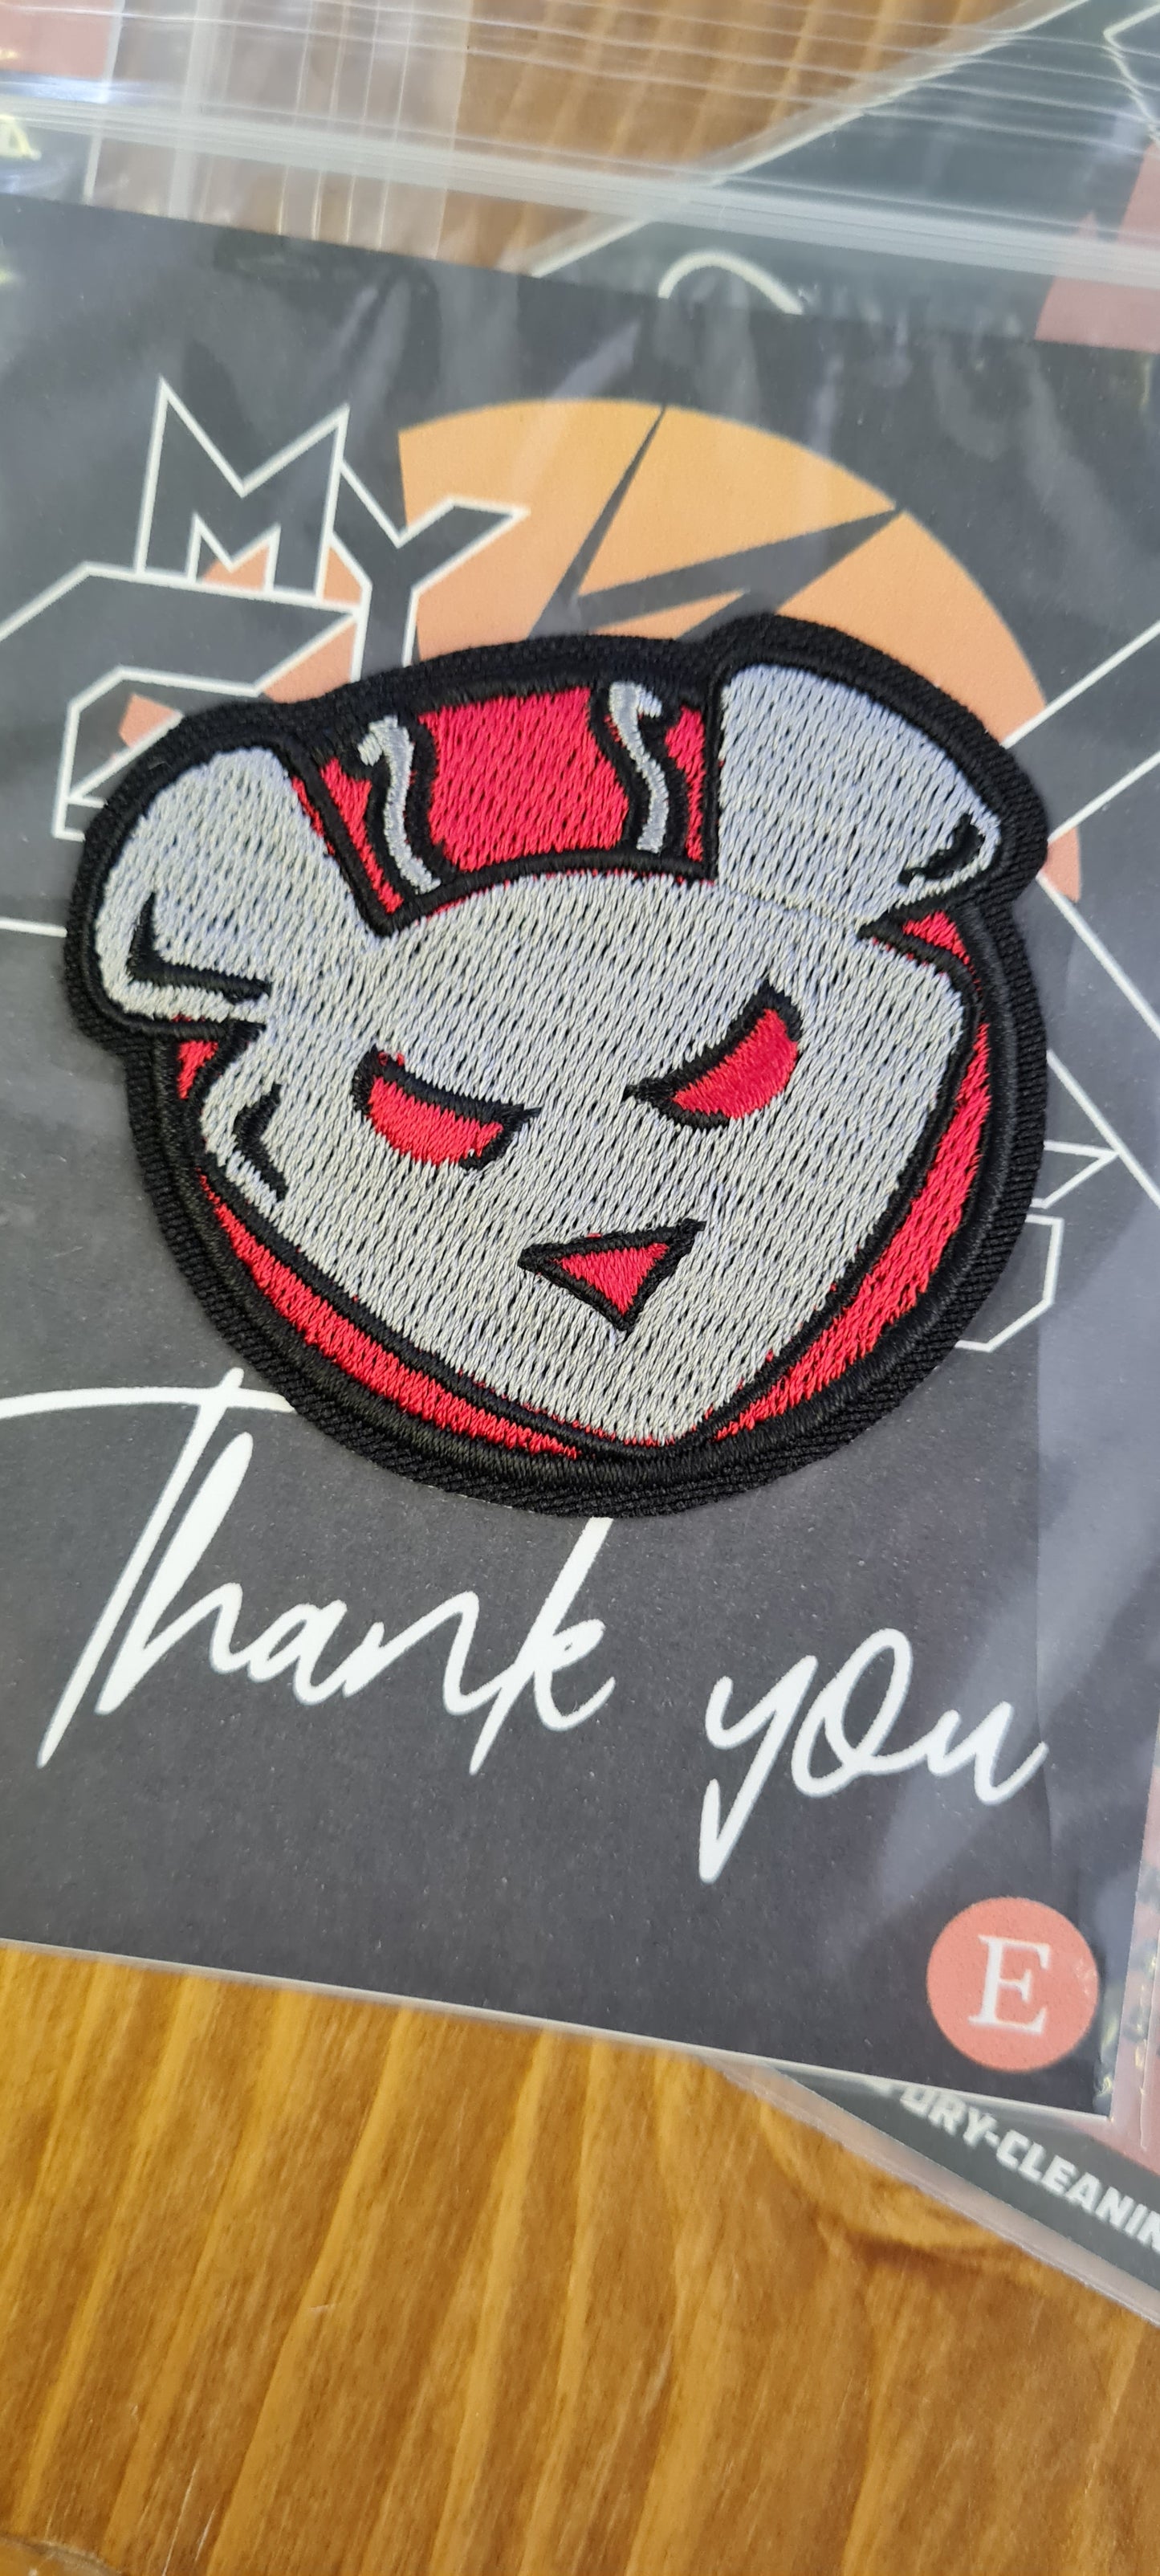 Biker Mice Inspired Embroidery Patch